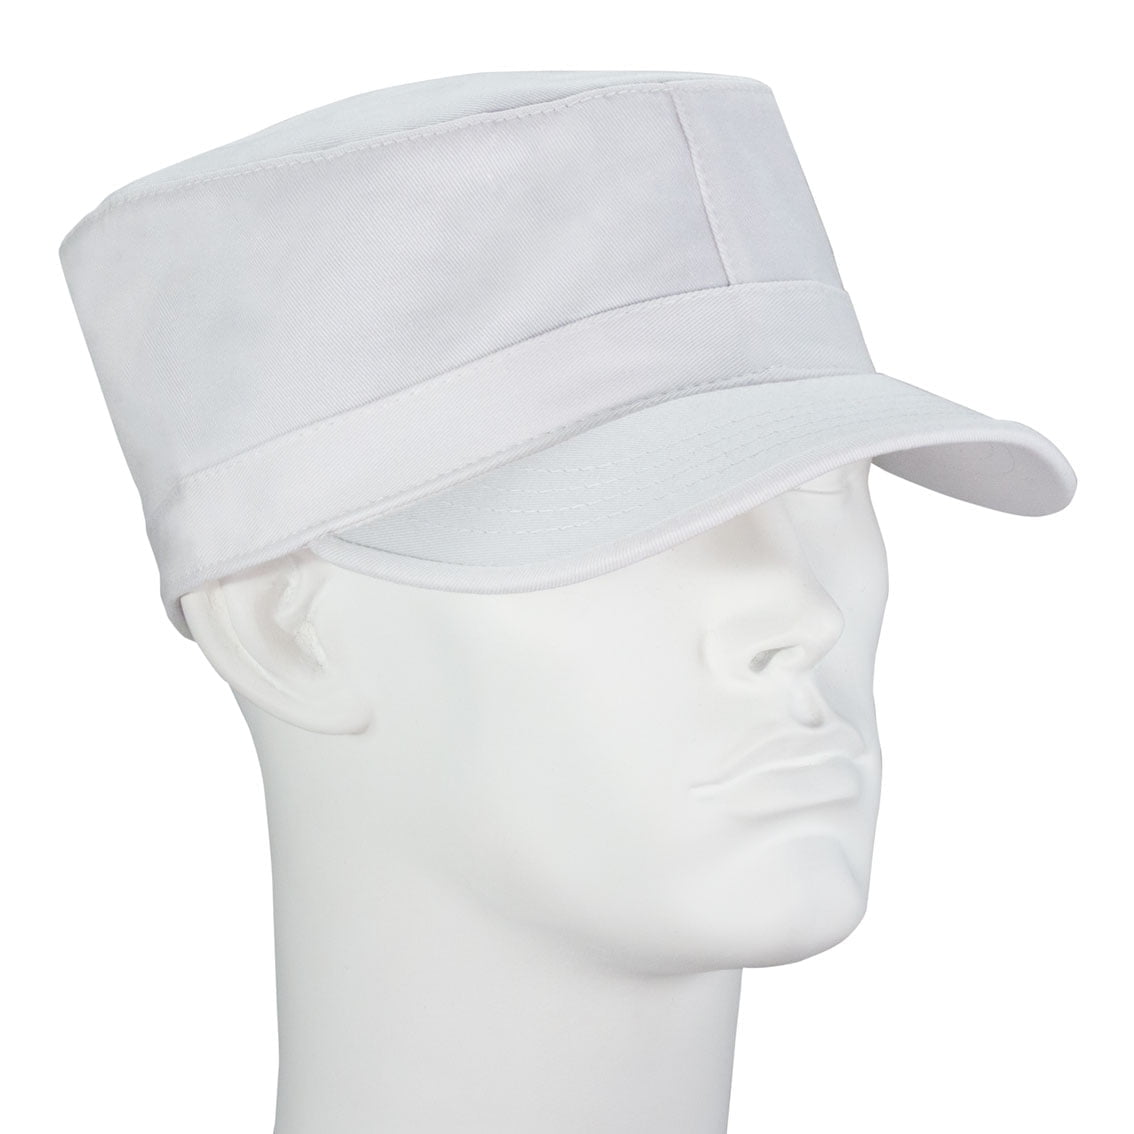 12pcs White Solid Castro Military Fatigue Army Hats - Fitted - Unconstructed - 100% Cotton - Bulk by the Dozen - Wholesale